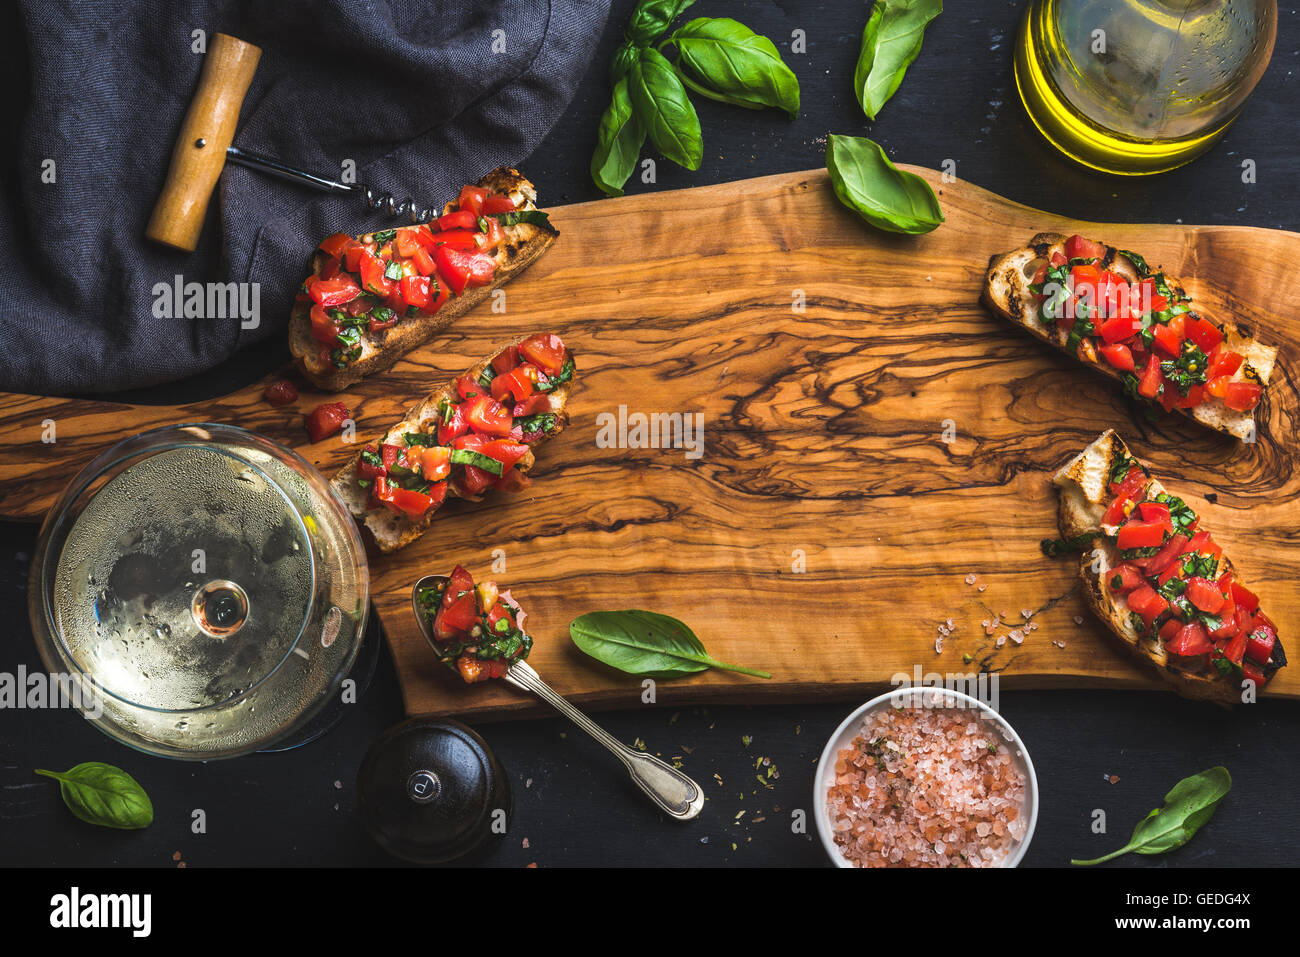 Tomato and basil bruschetta with glass of white wine, olive oil, salt, fresh herbs on wooden board over black background, copy space Stock Photo